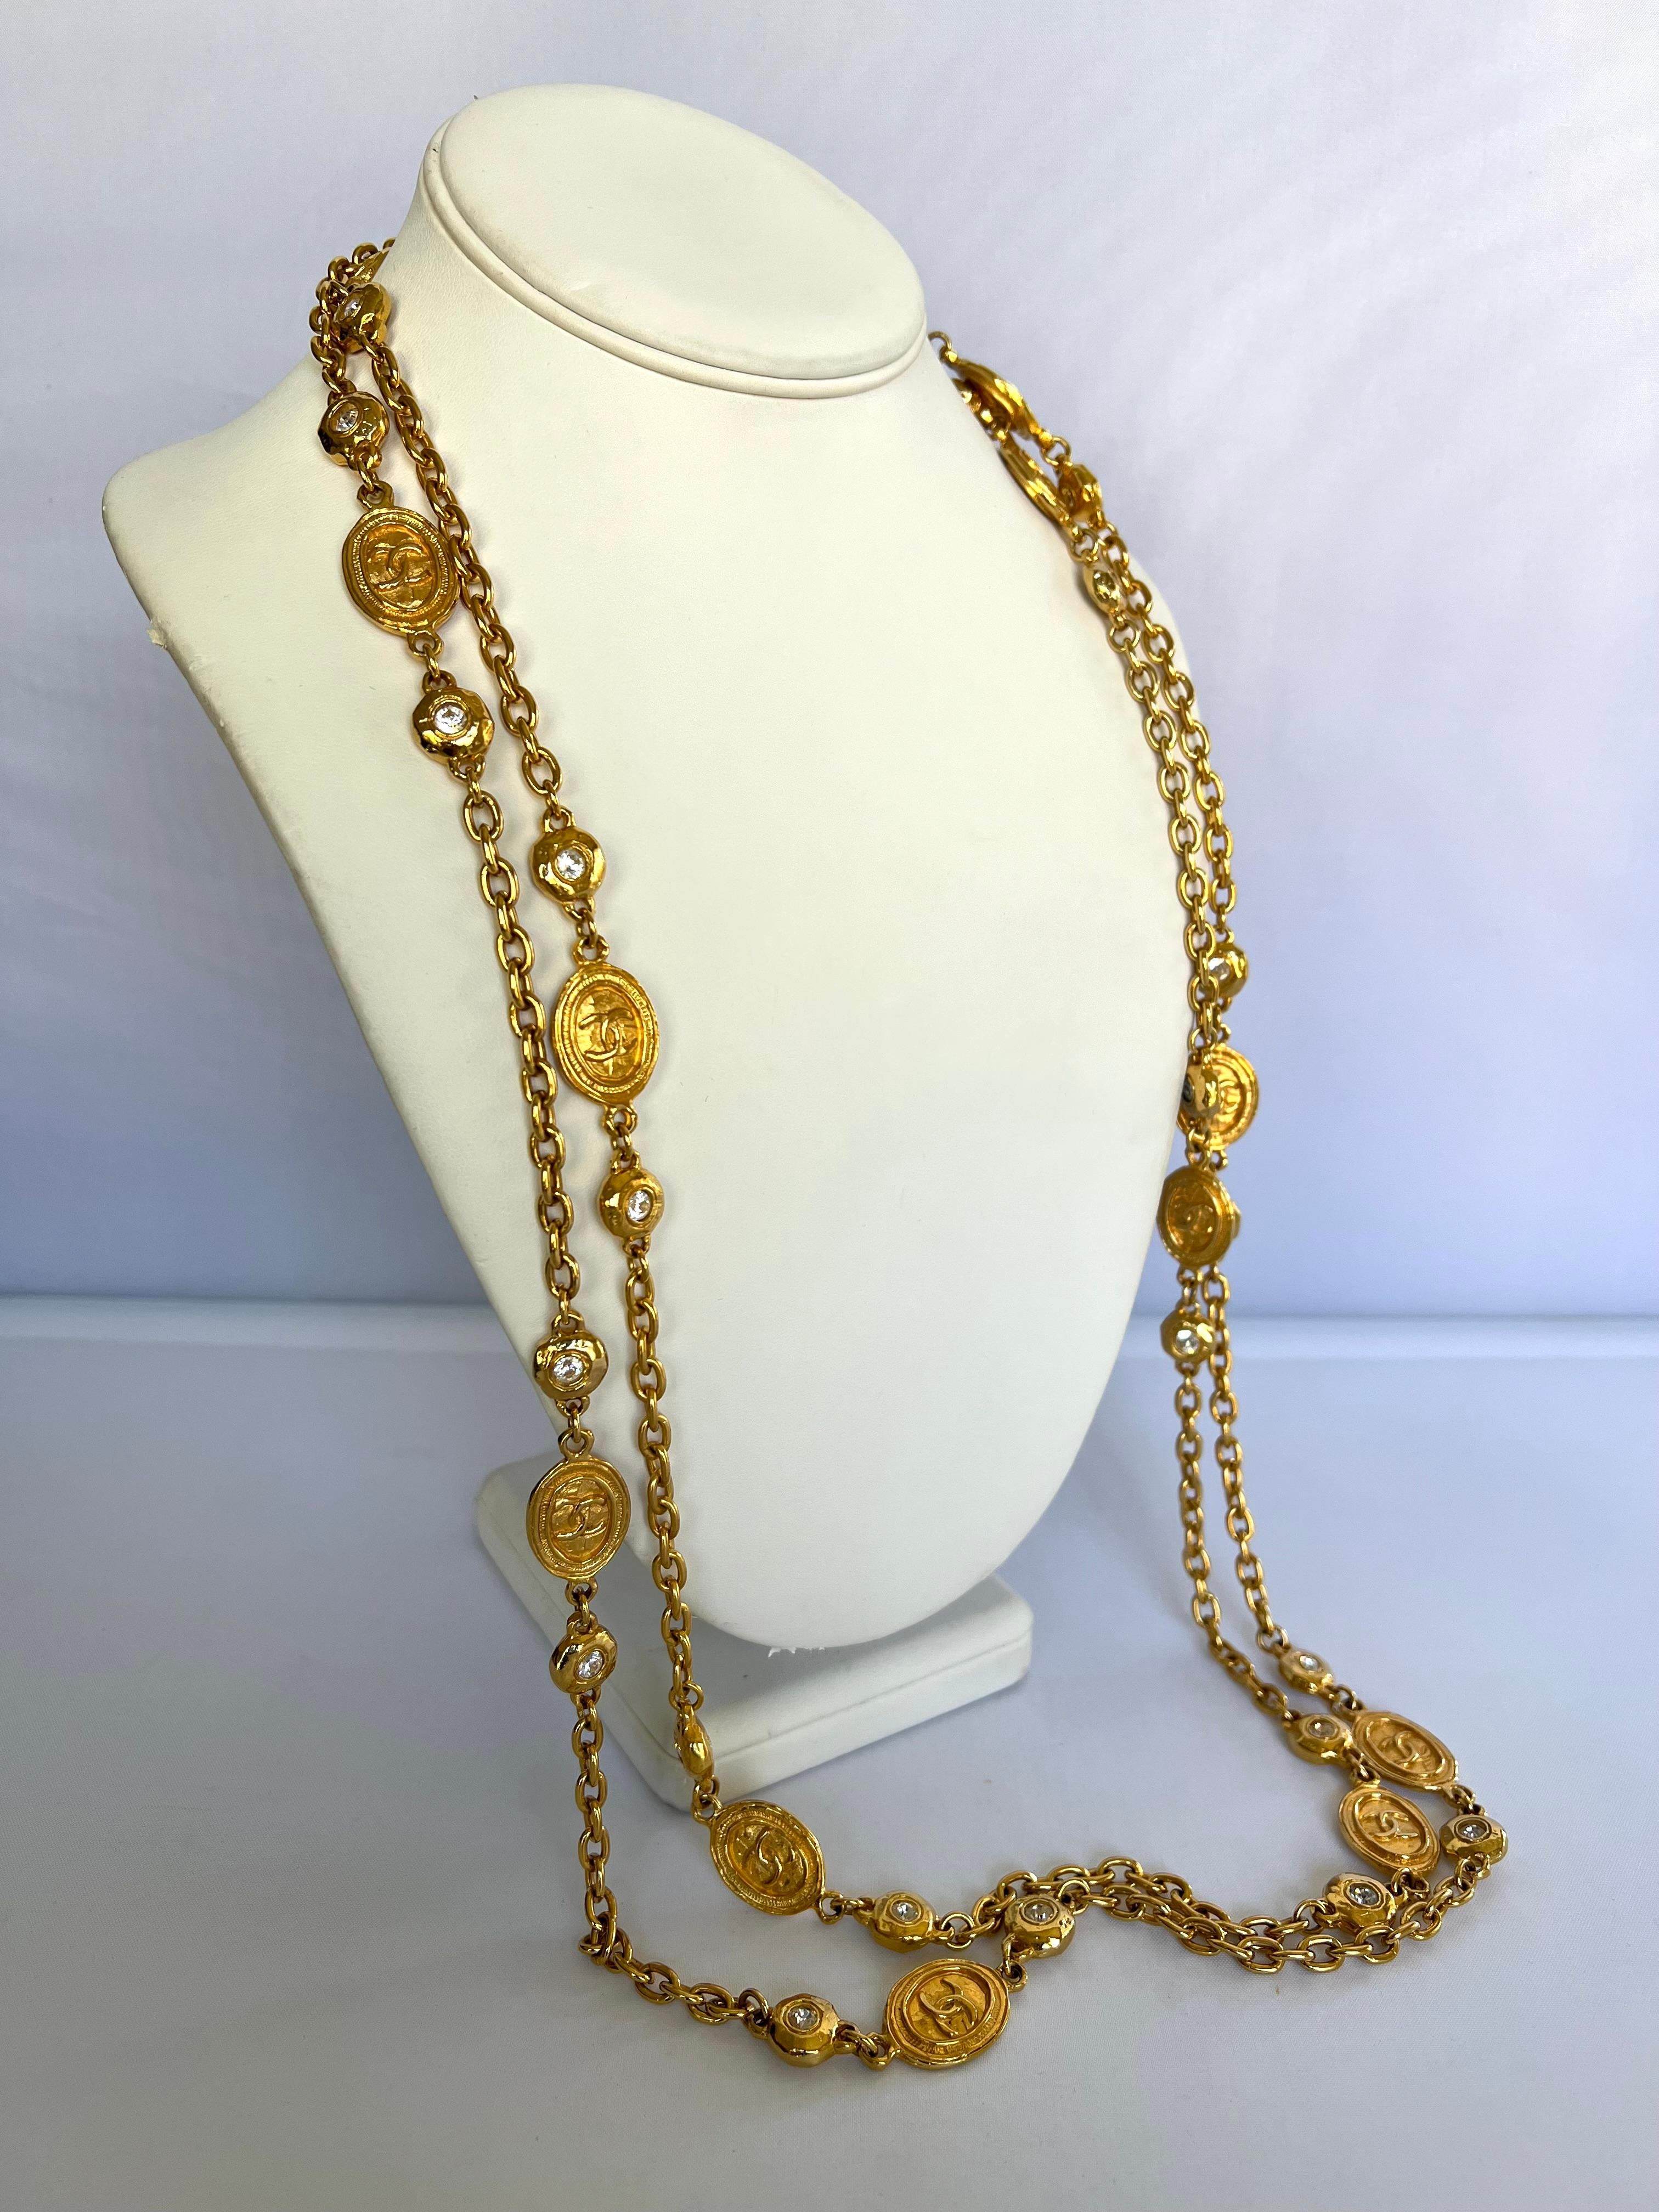 Vintage Chanel Gilt Double CC Logo Diamante Coin Necklace  In Excellent Condition For Sale In Palm Springs, CA